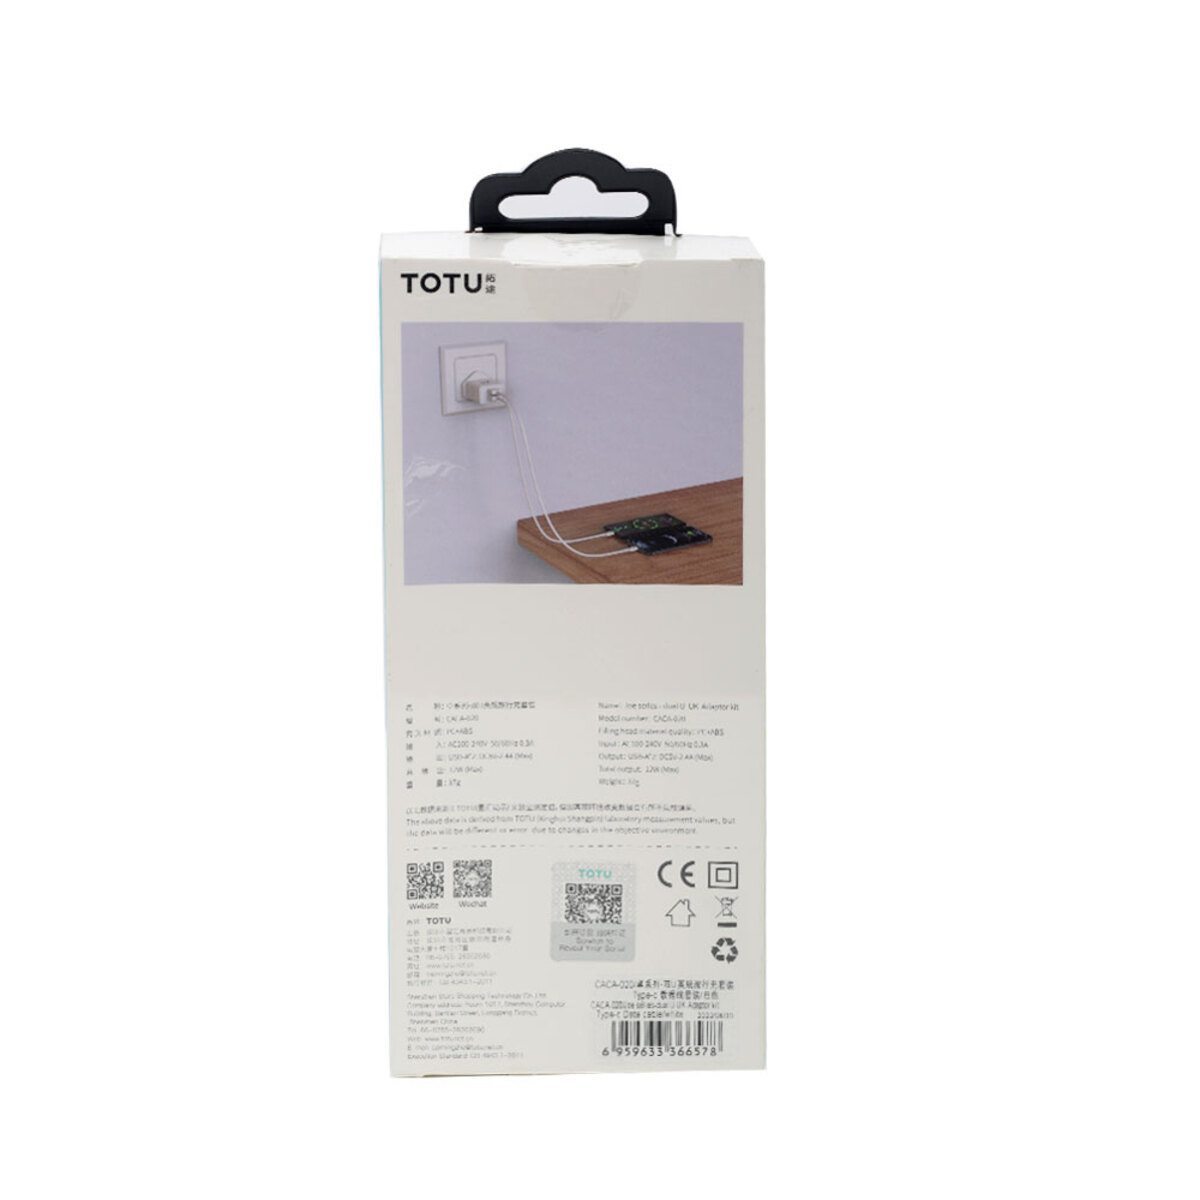 Totu Dual USB Home Charger + Type-C Cable CACA020